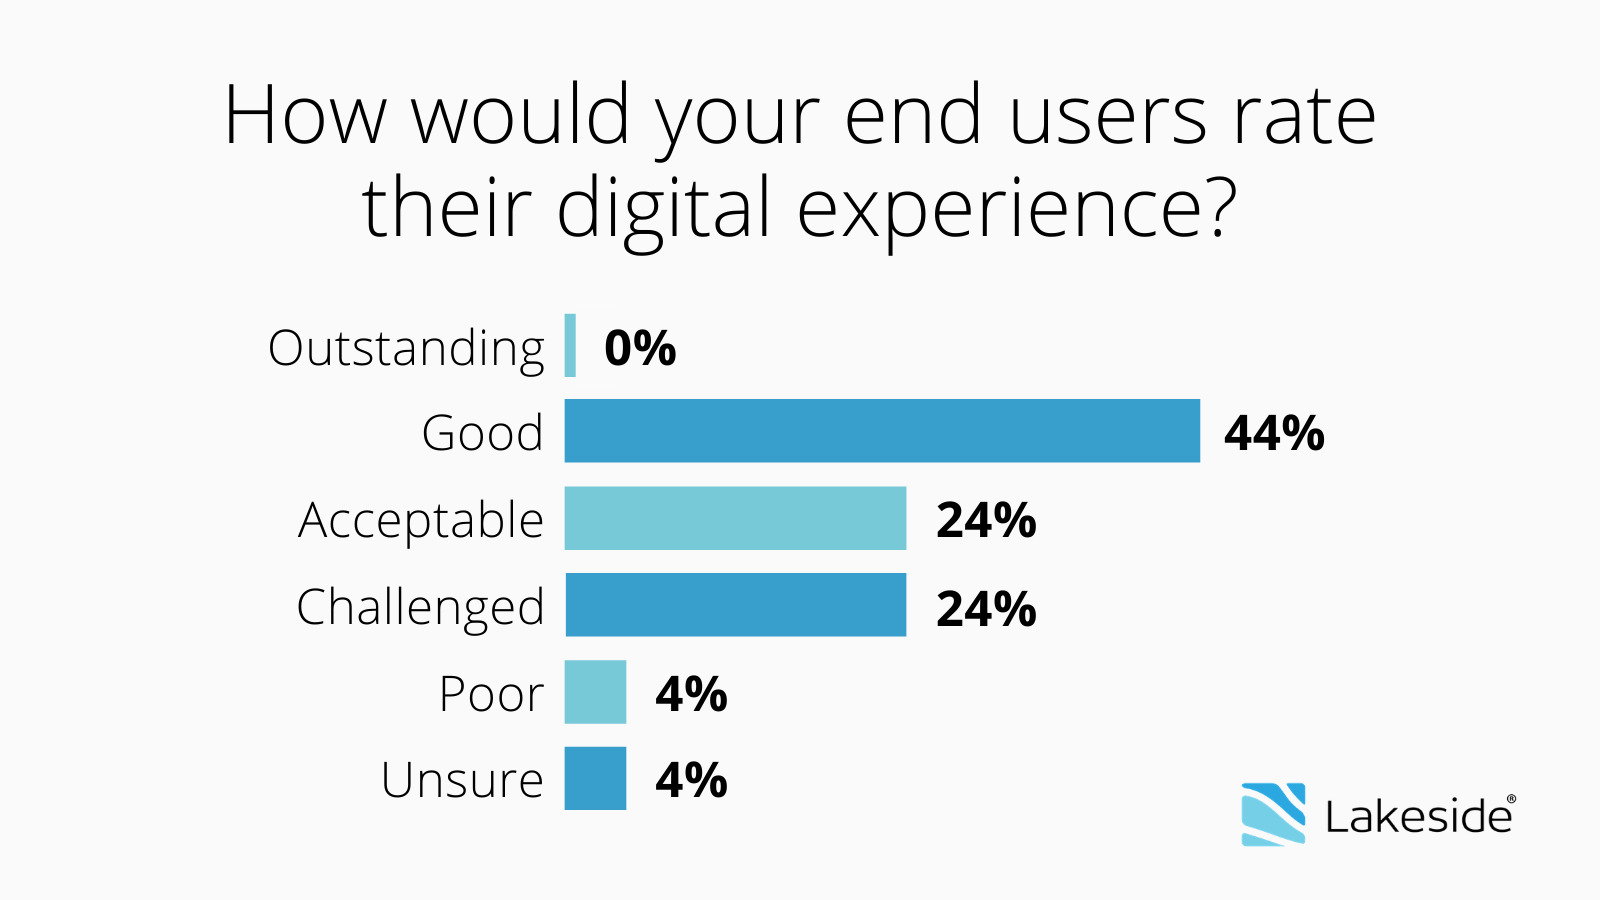 An infographic showing the results of a webinar poll asking "How would your end users rate their digital experience?"